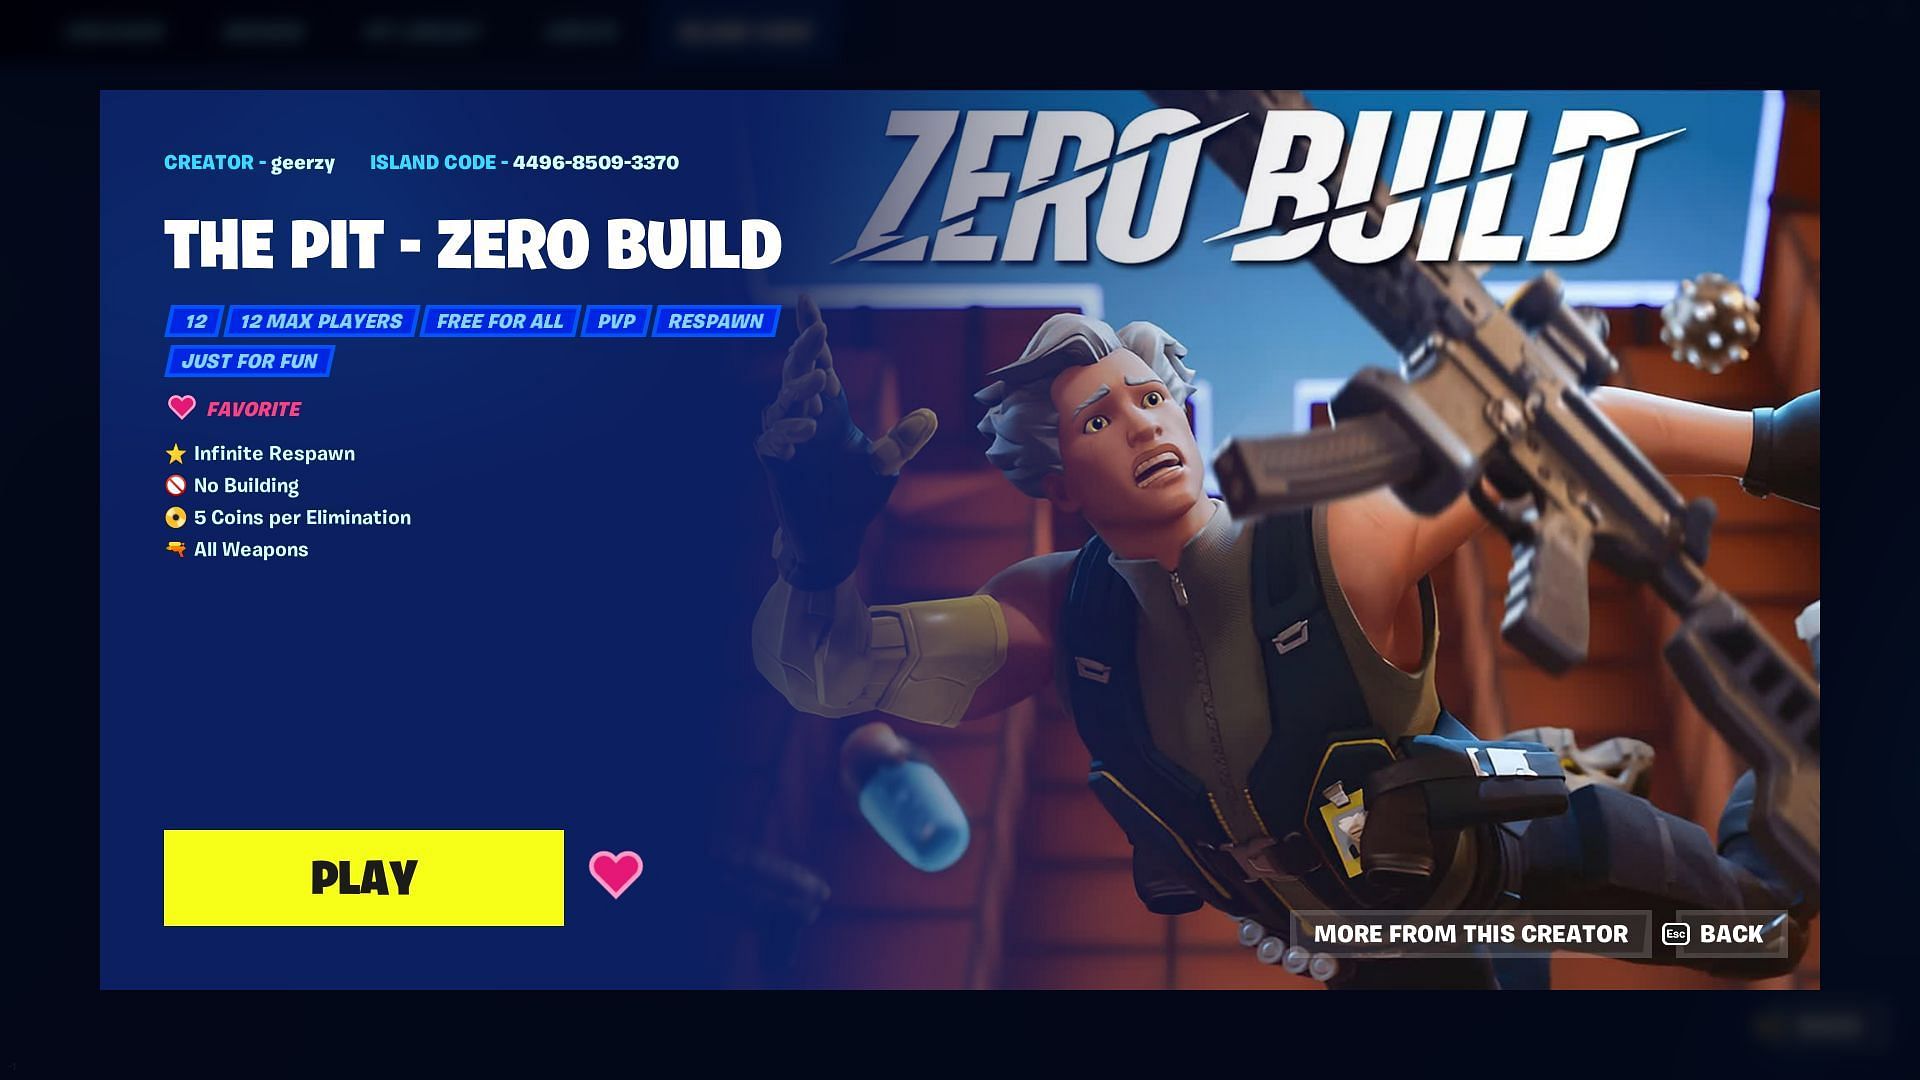 Remember to mark The Pit - Zero Build as favorite to find it easily (Image via Epic Games/Fortnite)